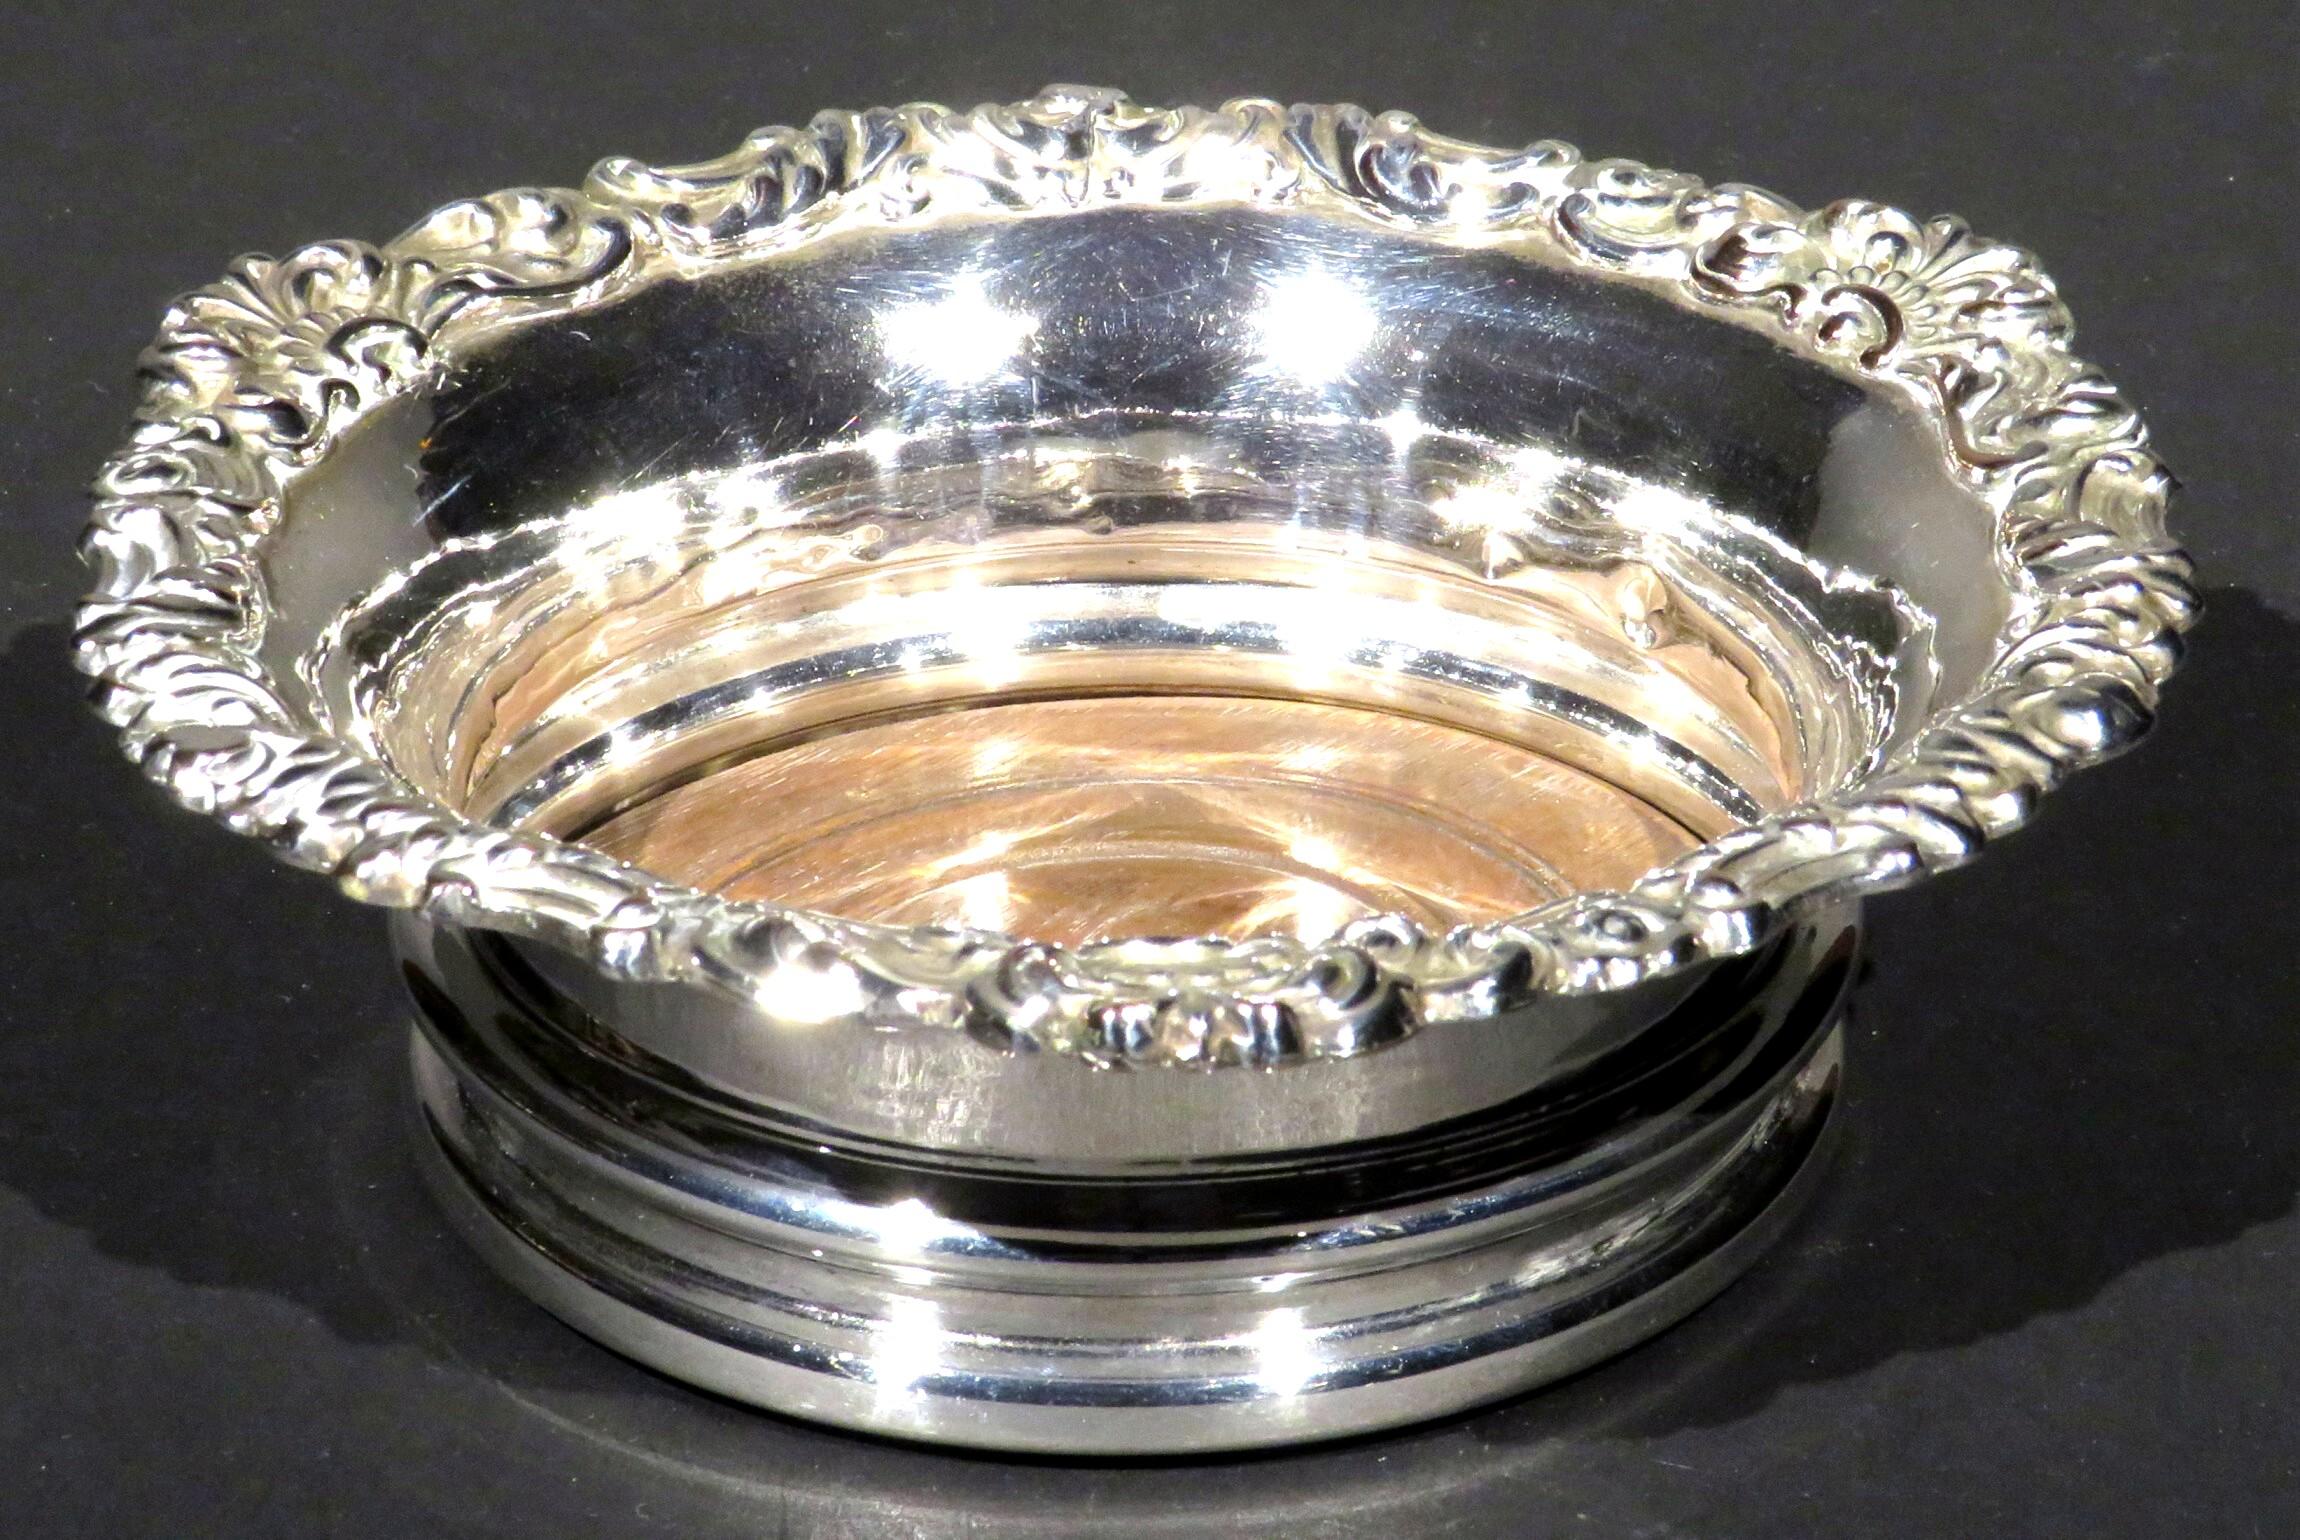 A very good silver plated spirit decanter coaster featuring a high walled body & flaring rim rising from a turned wooden base, the underside lined in red baize. This particular style of coaster was specifically designed to shield spirits such as